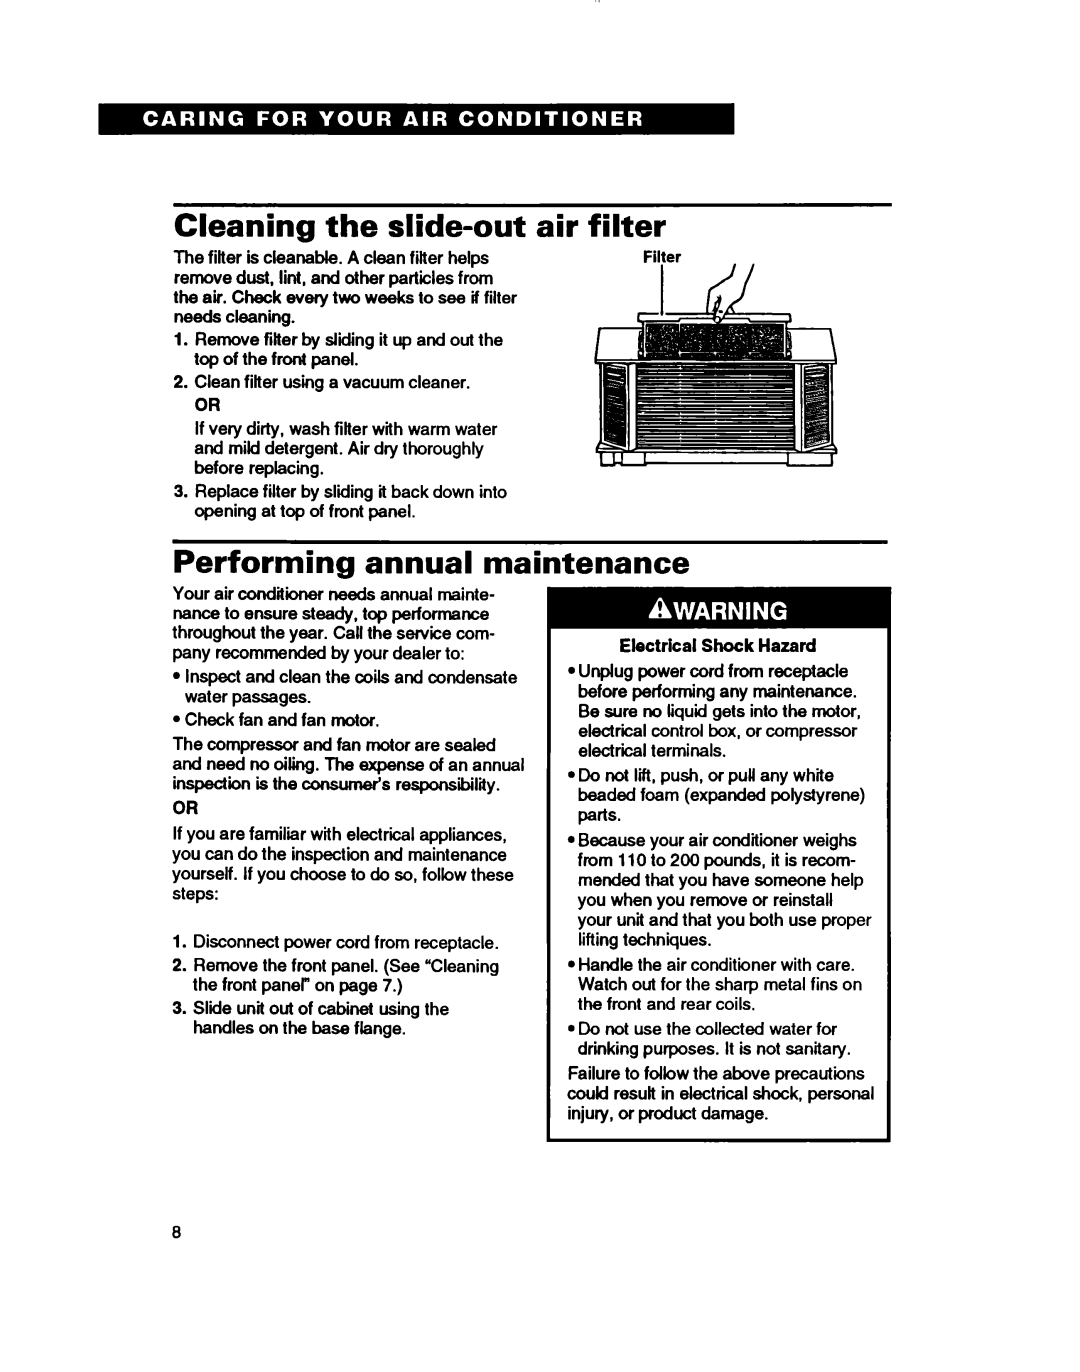 Whirlpool ACU124XD0 Cleaning the slide-out, air filter, Performing annual maintenance, Filter, Electrical Shock Hazard 